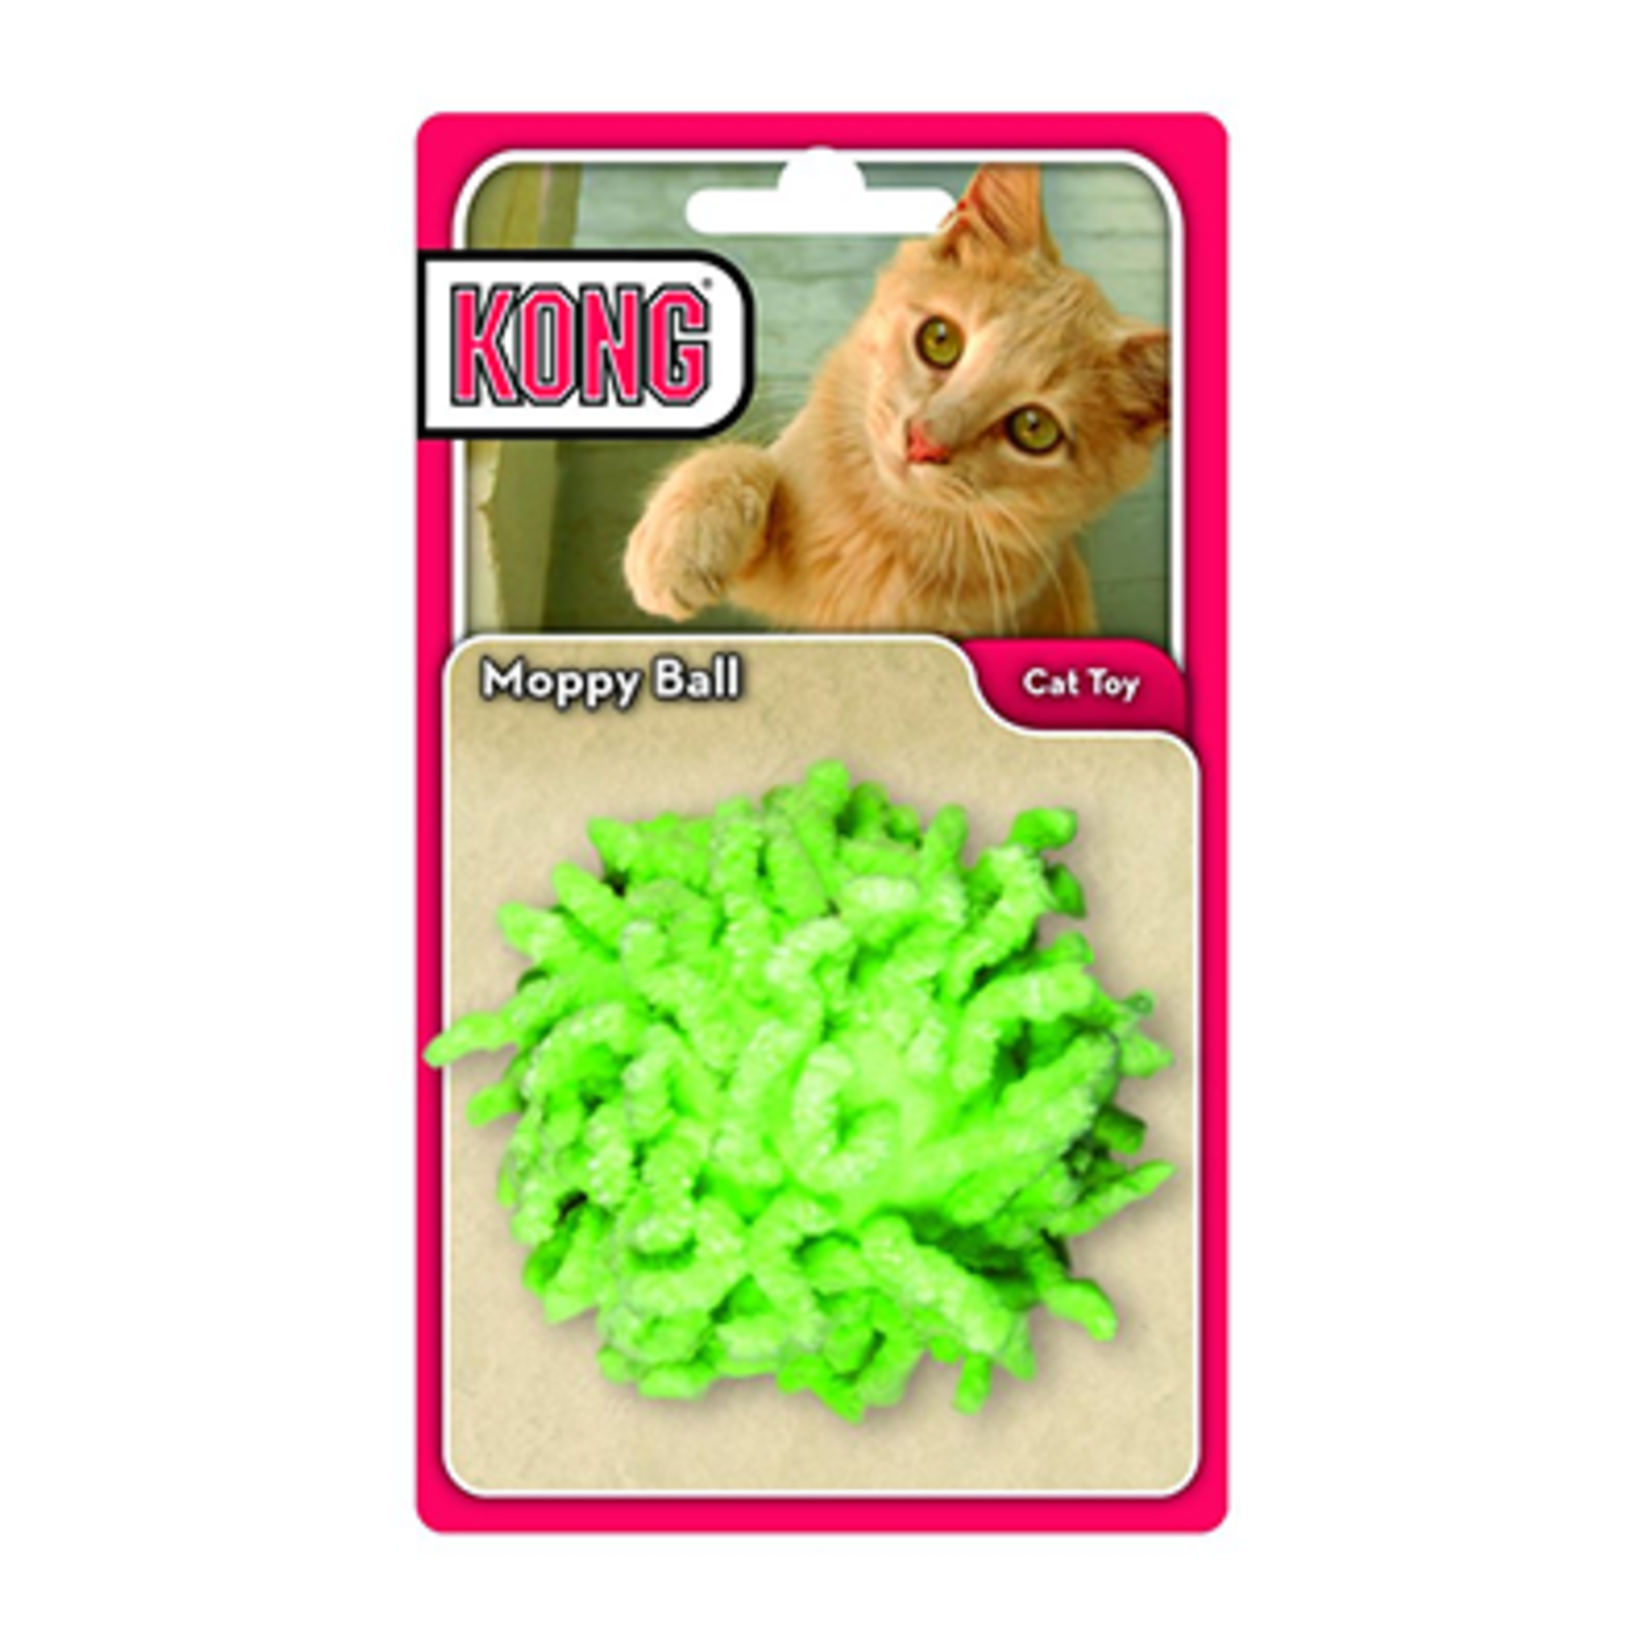 Kong Moppy ball - rattle sound - Blue or green